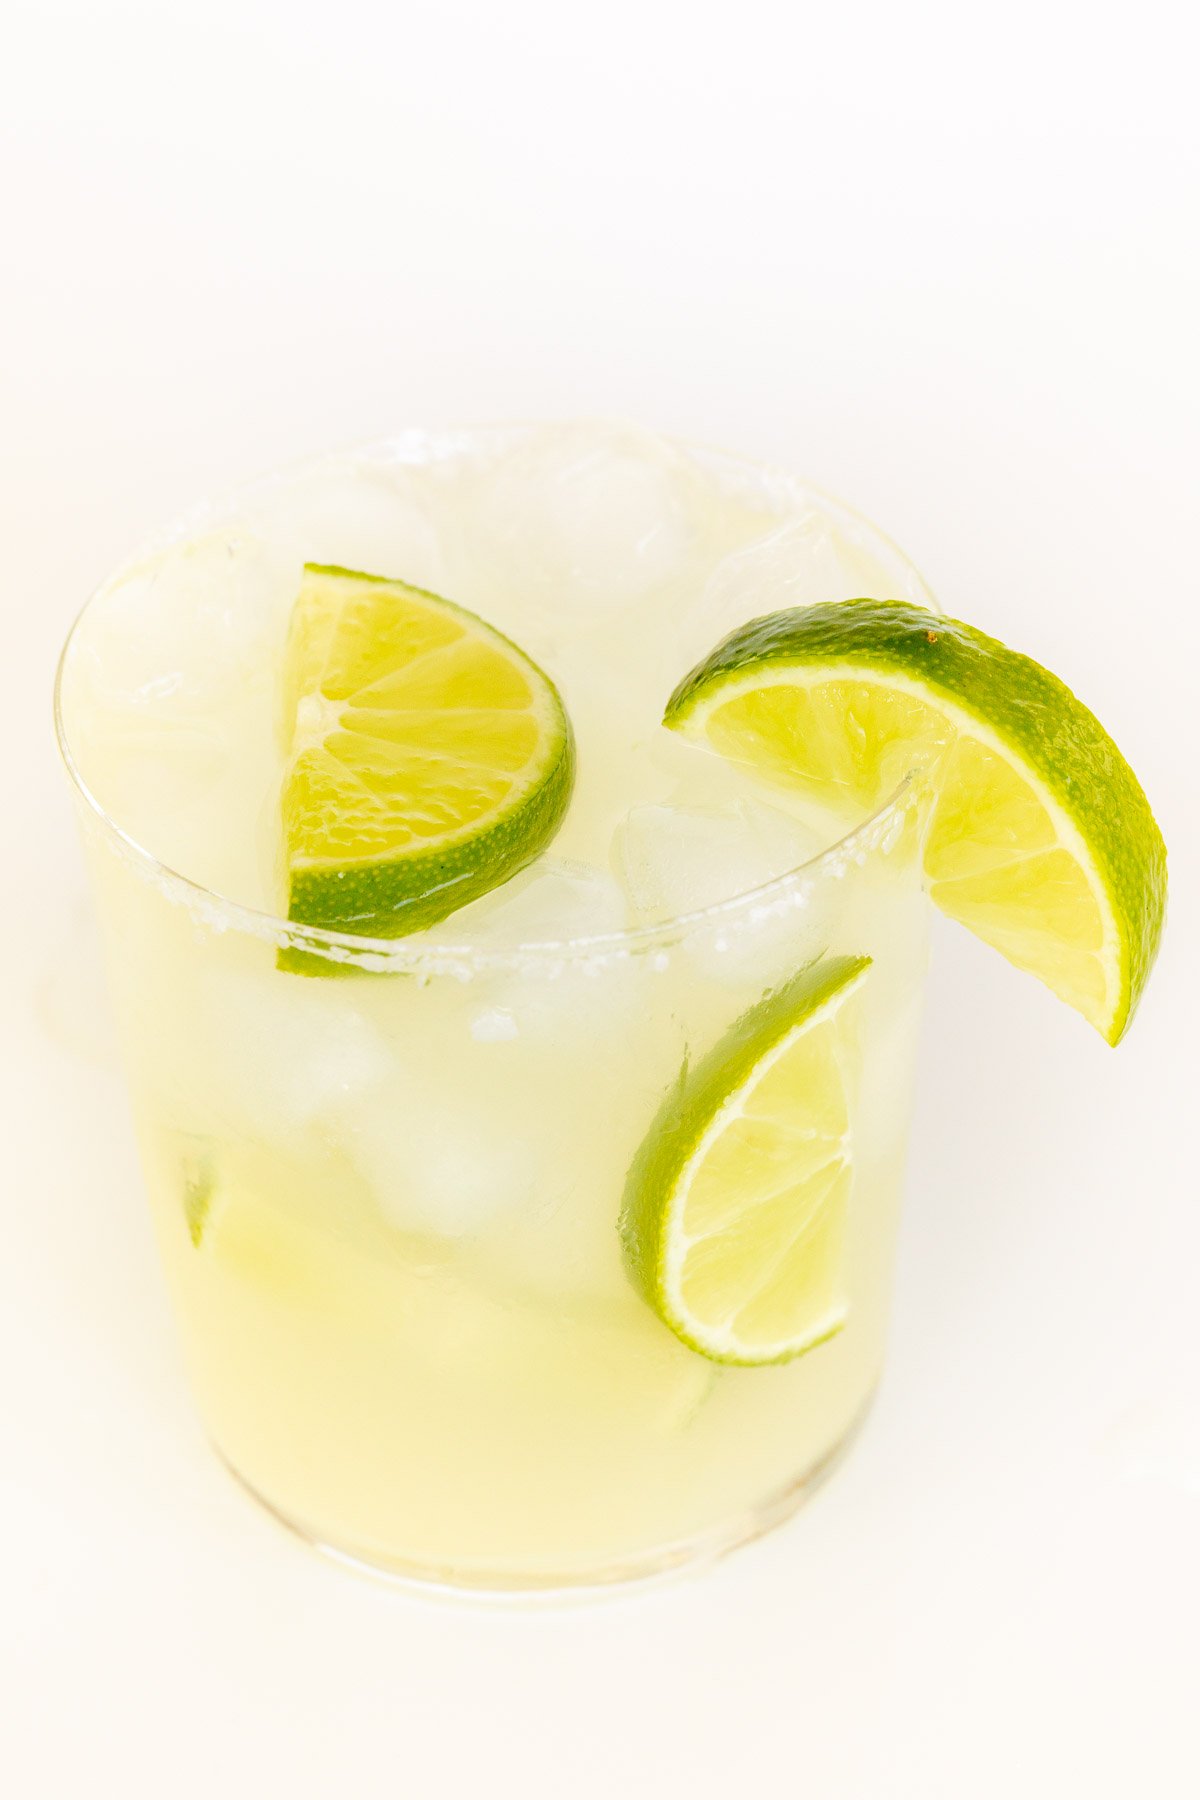 A clear glass with a homemade margarita recipe garnished with limes